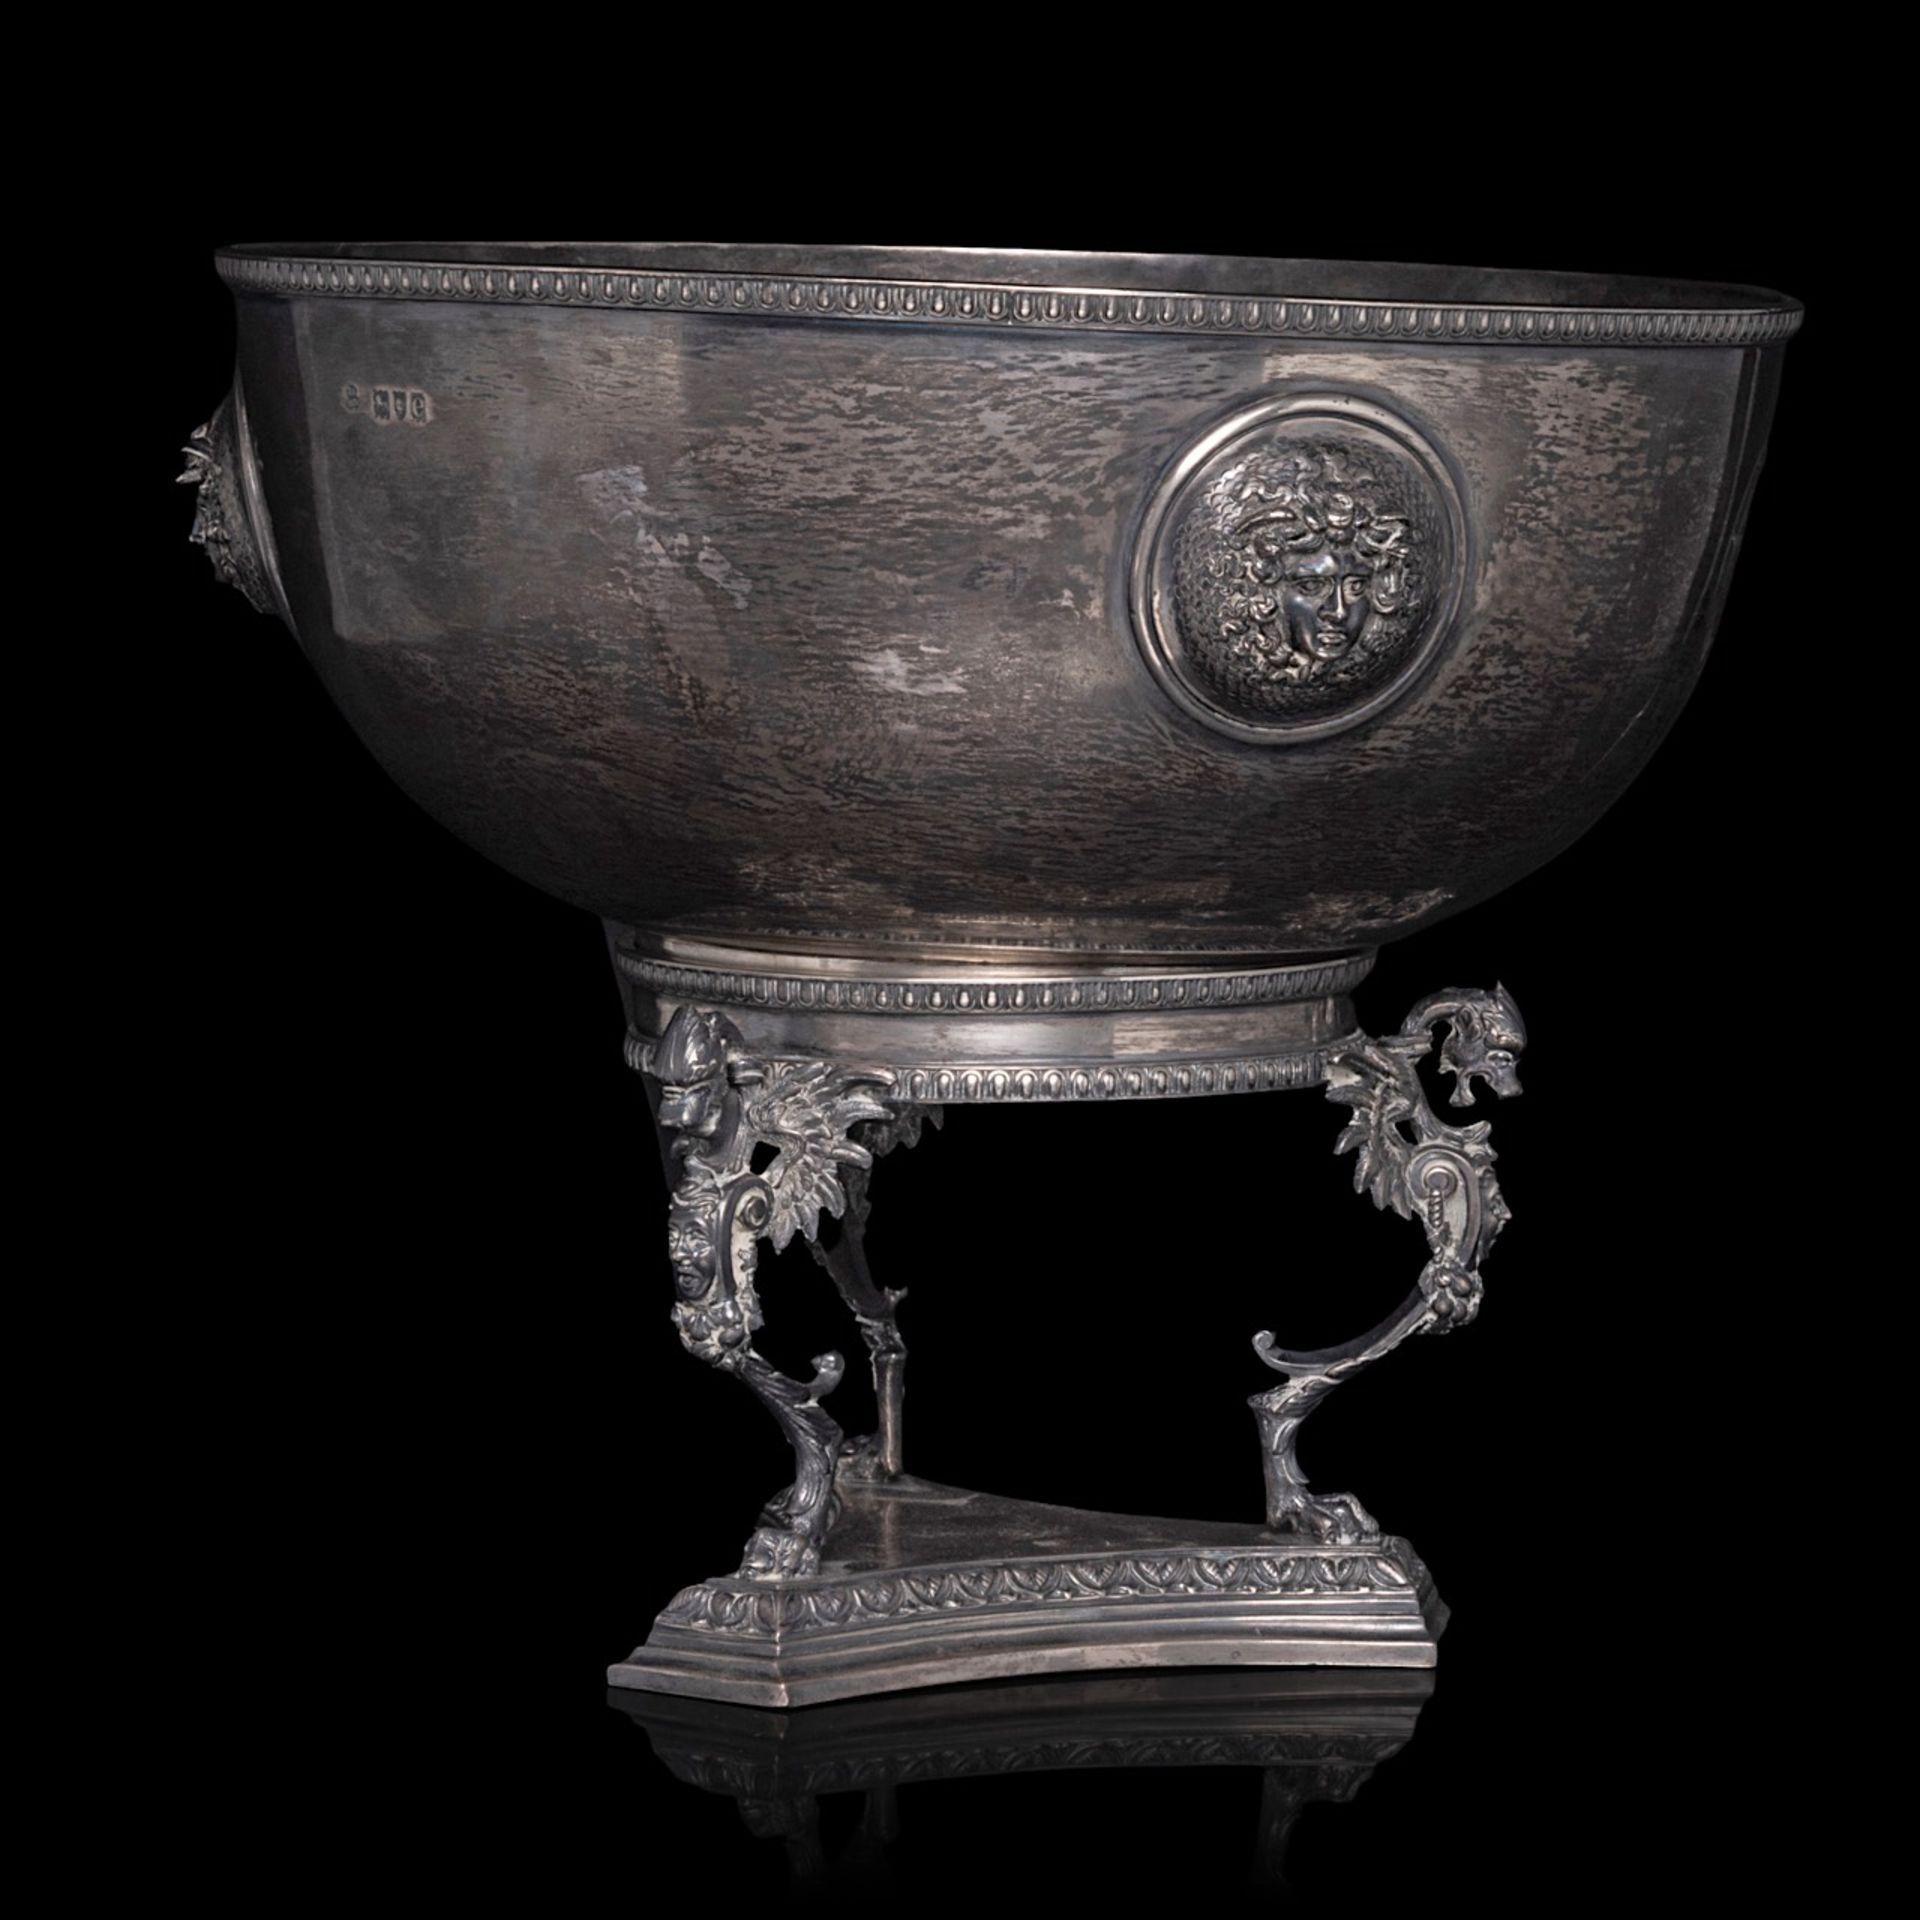 A Neoclassical English silver punchbowl, London hallmarks, year letter E (1900-1901), maker's mark J - Image 4 of 8